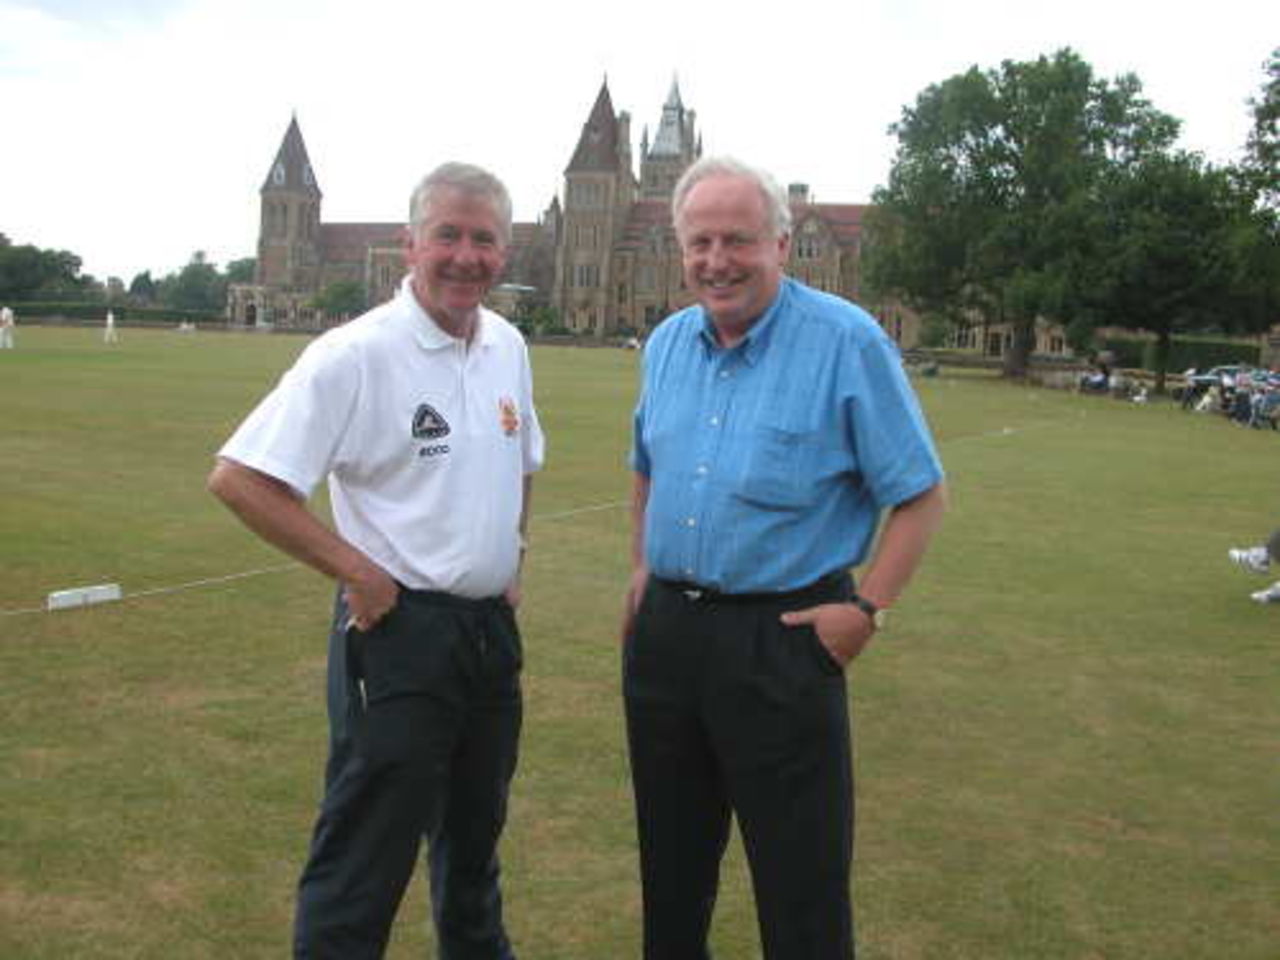 Deputy Head master Richard Gilliat and Cricket coach Richard Lewis, two former Hampshire players visit the match